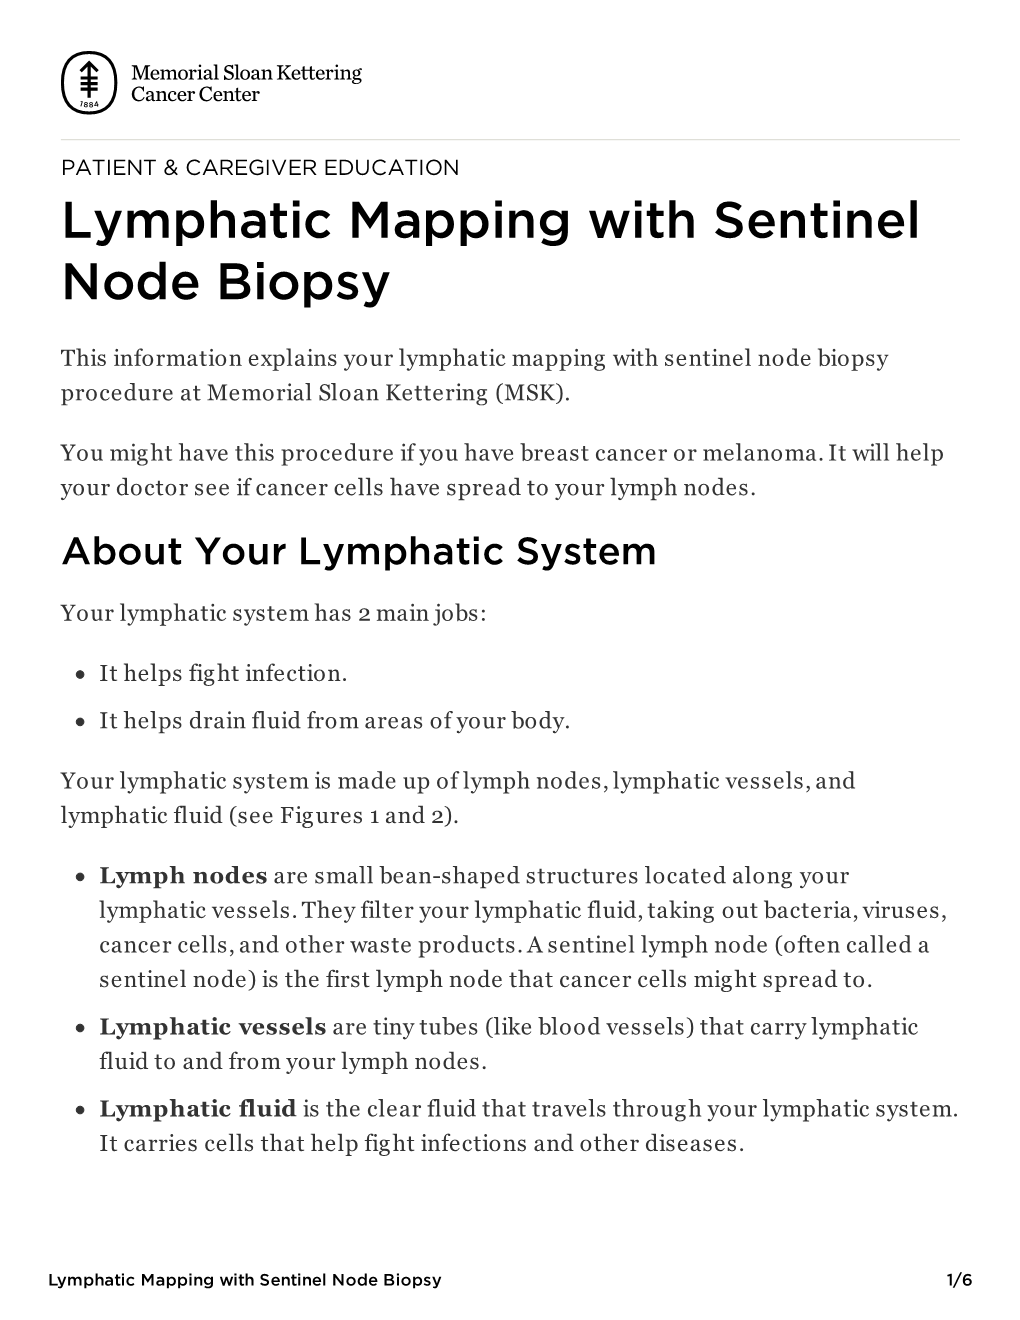 Lymphatic Mapping with Sentinel Node Biopsy